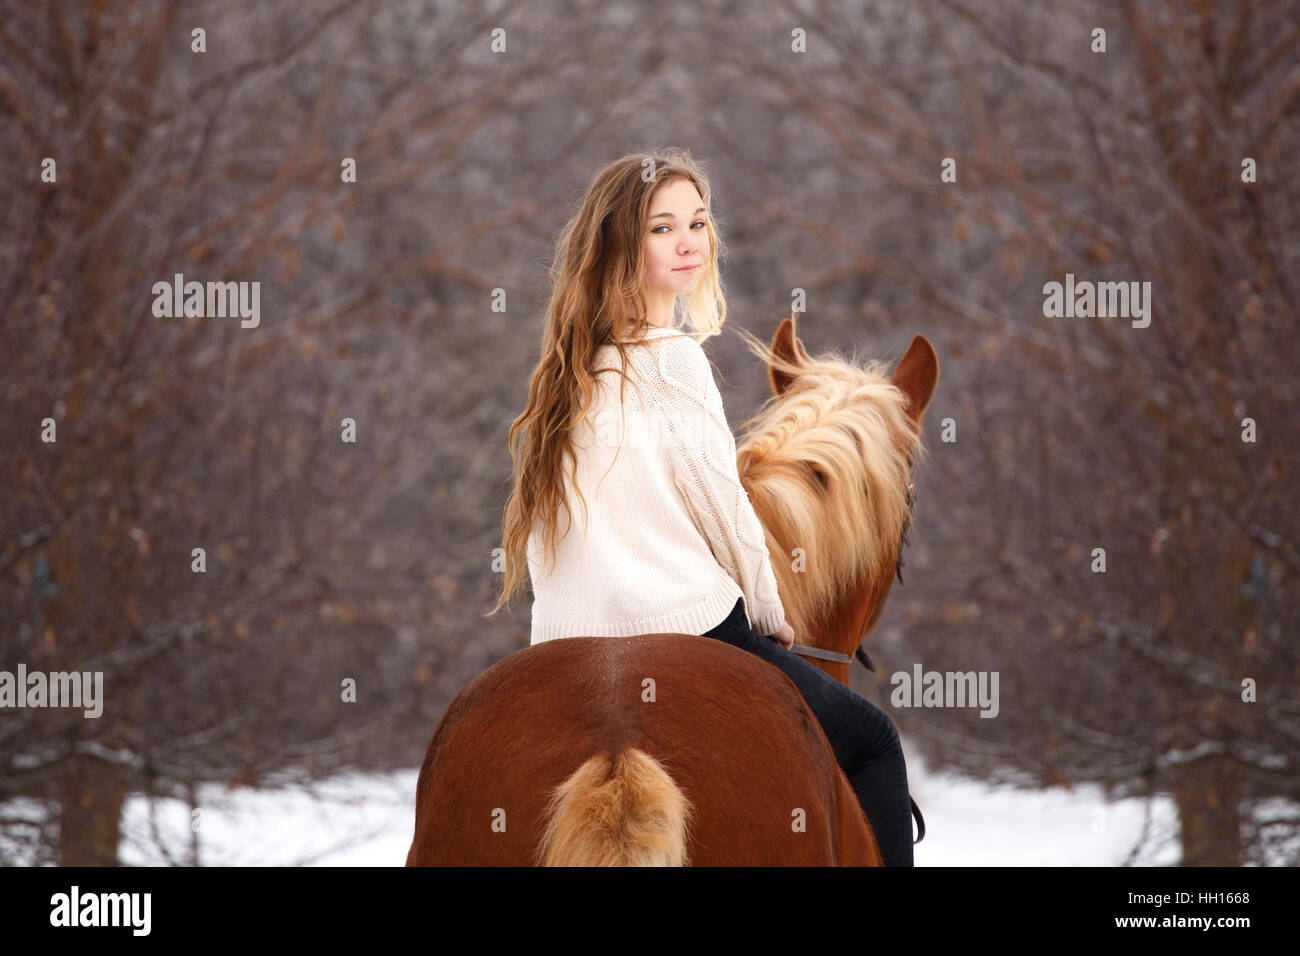 Cute girl riding horse looking back over shoulder Stock Photo